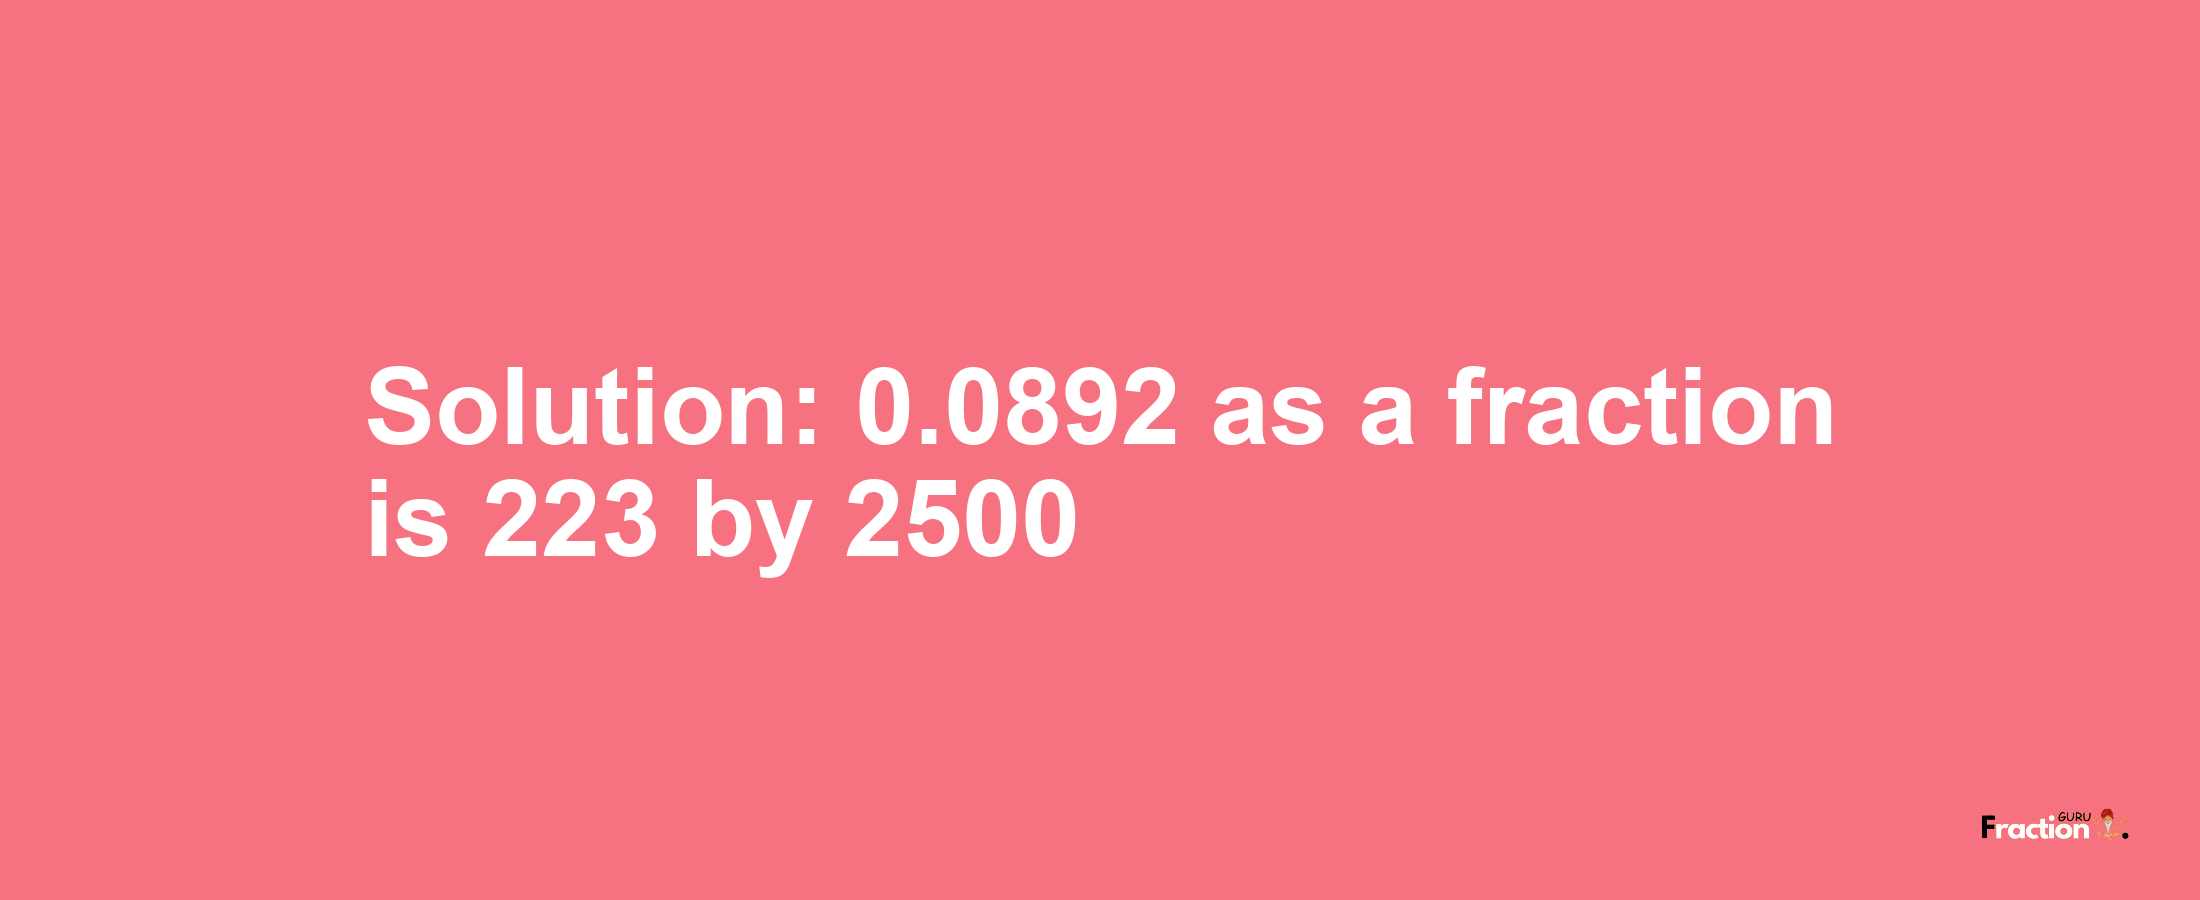 Solution:0.0892 as a fraction is 223/2500